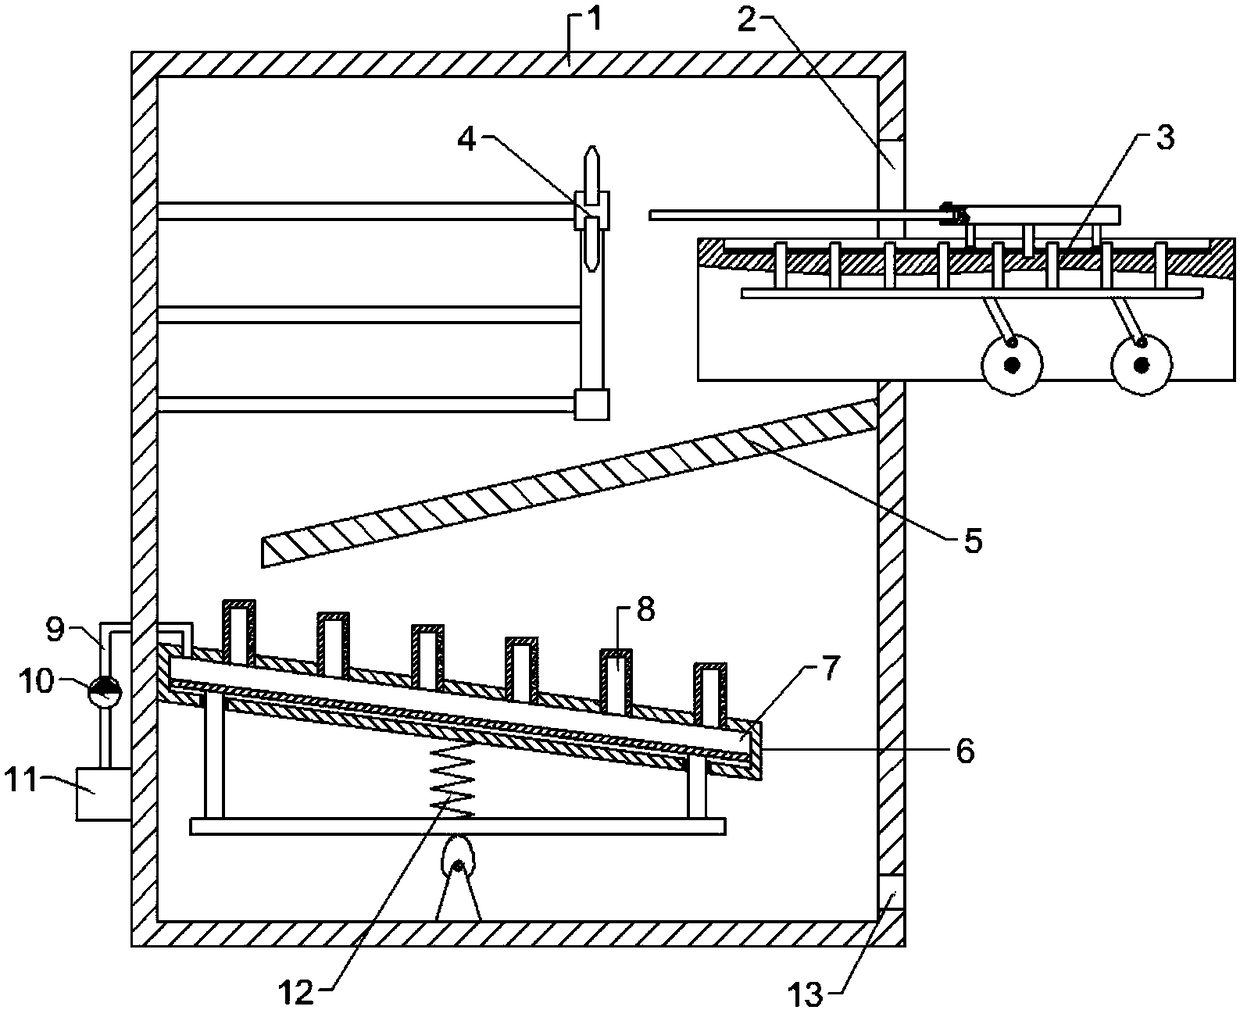 Equal-length cutting equipment for medicine processing based on parallel feeding principle